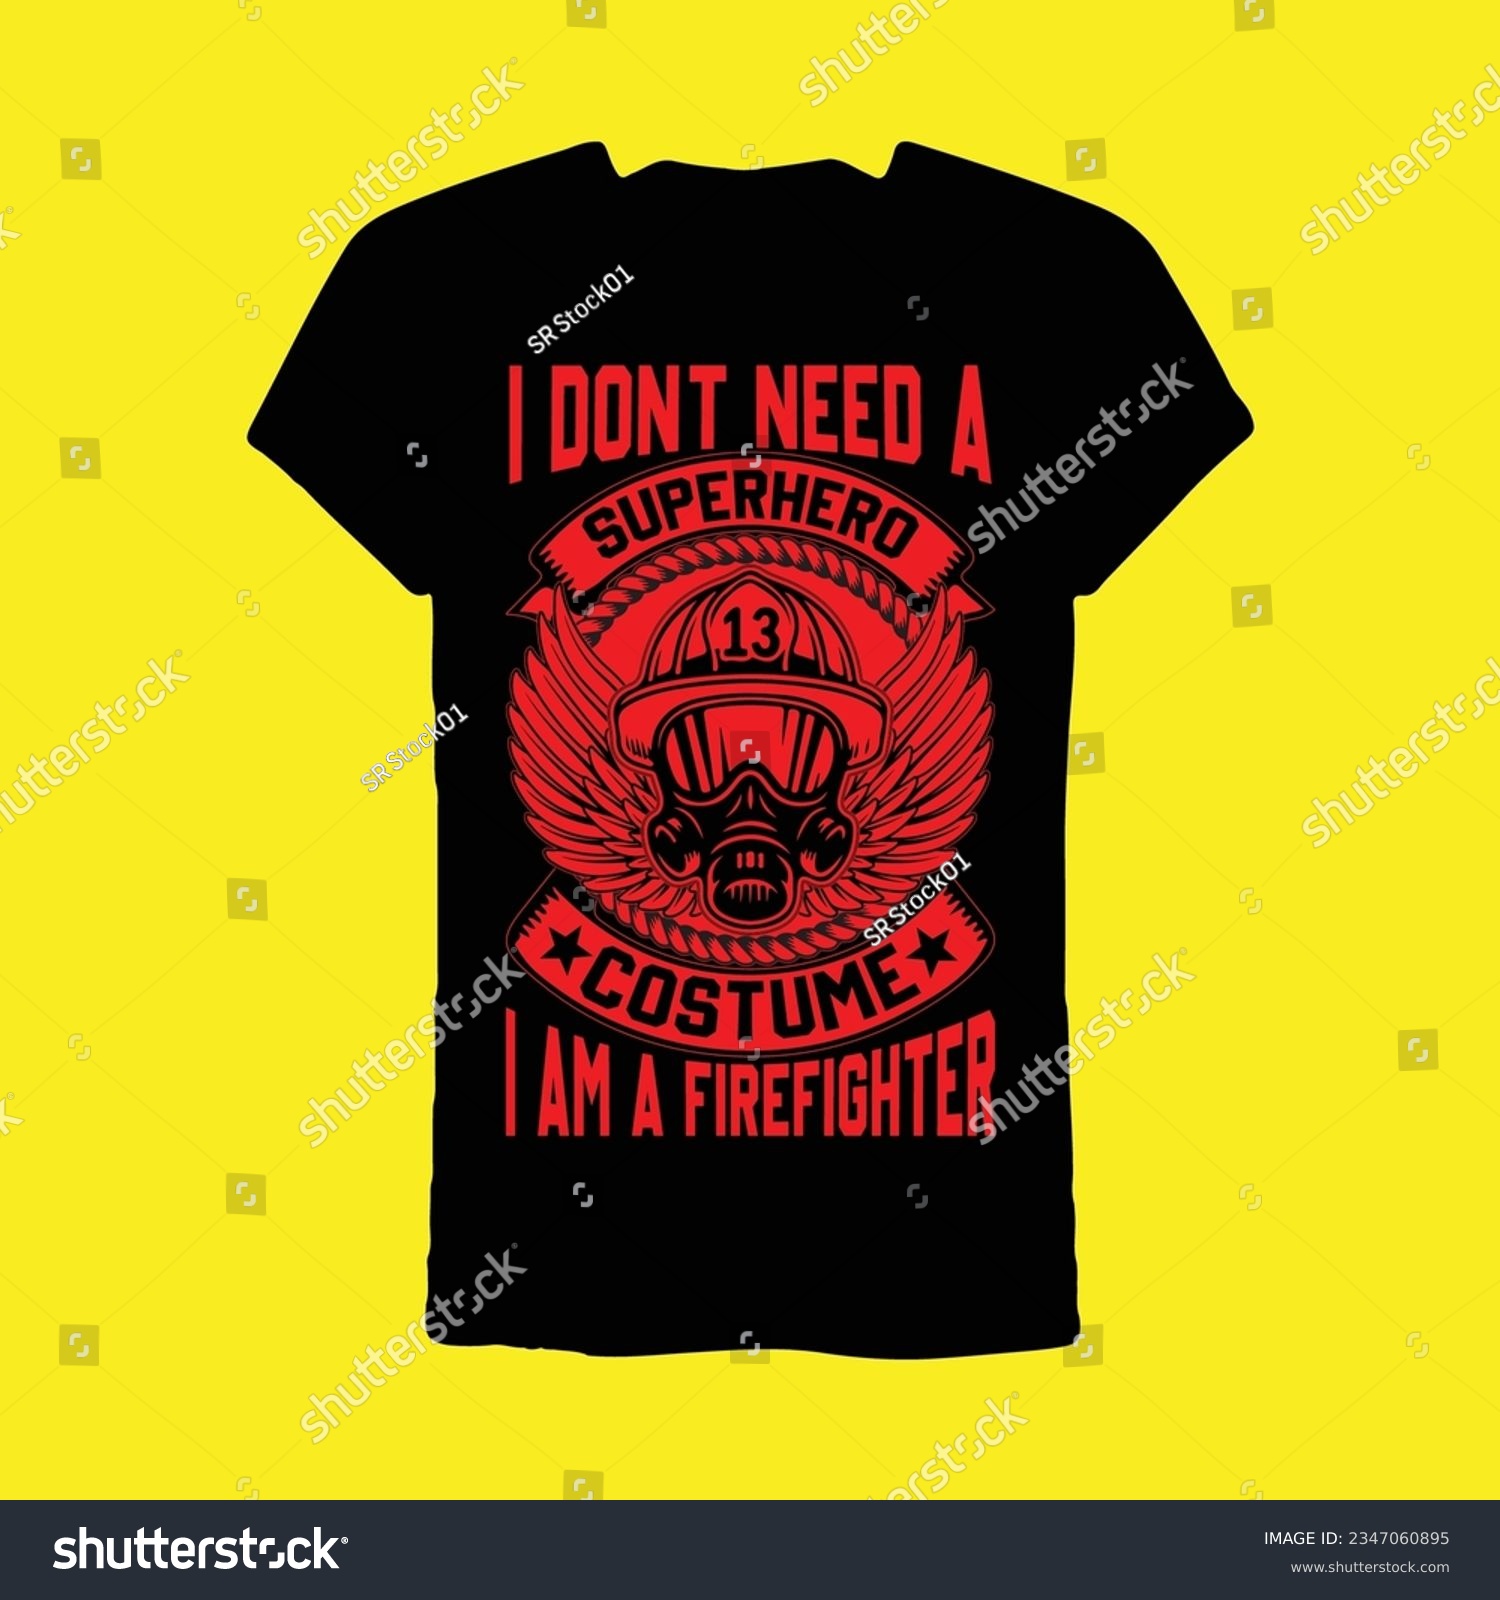 SVG of I Don't Need A Superhero Costume I am a Firefighter t-shirt svg